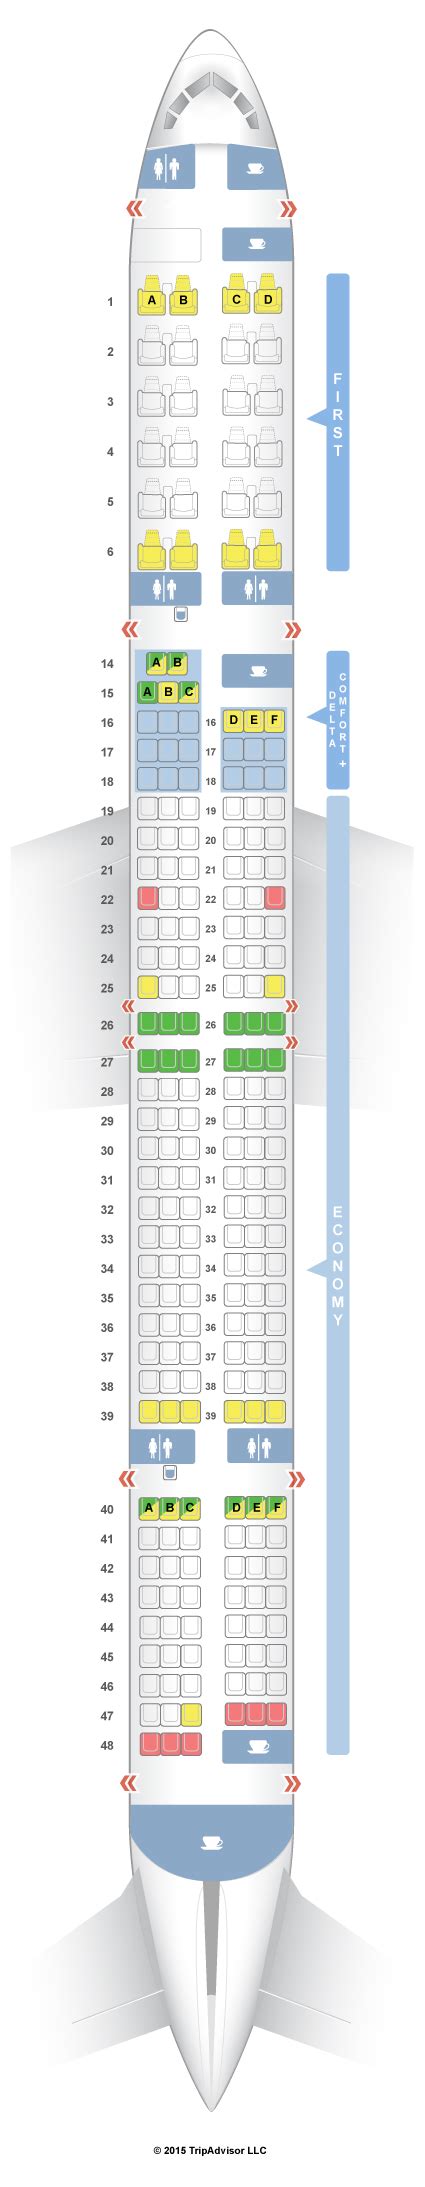 Seatguru delta 757 300. For your next Delta flight, use this seating chart to get the most comfortable seats, legroom, ... Boeing 757-300 (75Y) Boeing 767-300ER (76H/76Z) Layout 3; Boeing 767-300ER (76L) Layout 2; ... SeatGuru was created to help travelers choose the best seats and in-flight amenities. Forum; Mobile; FAQ; Contact Us; 